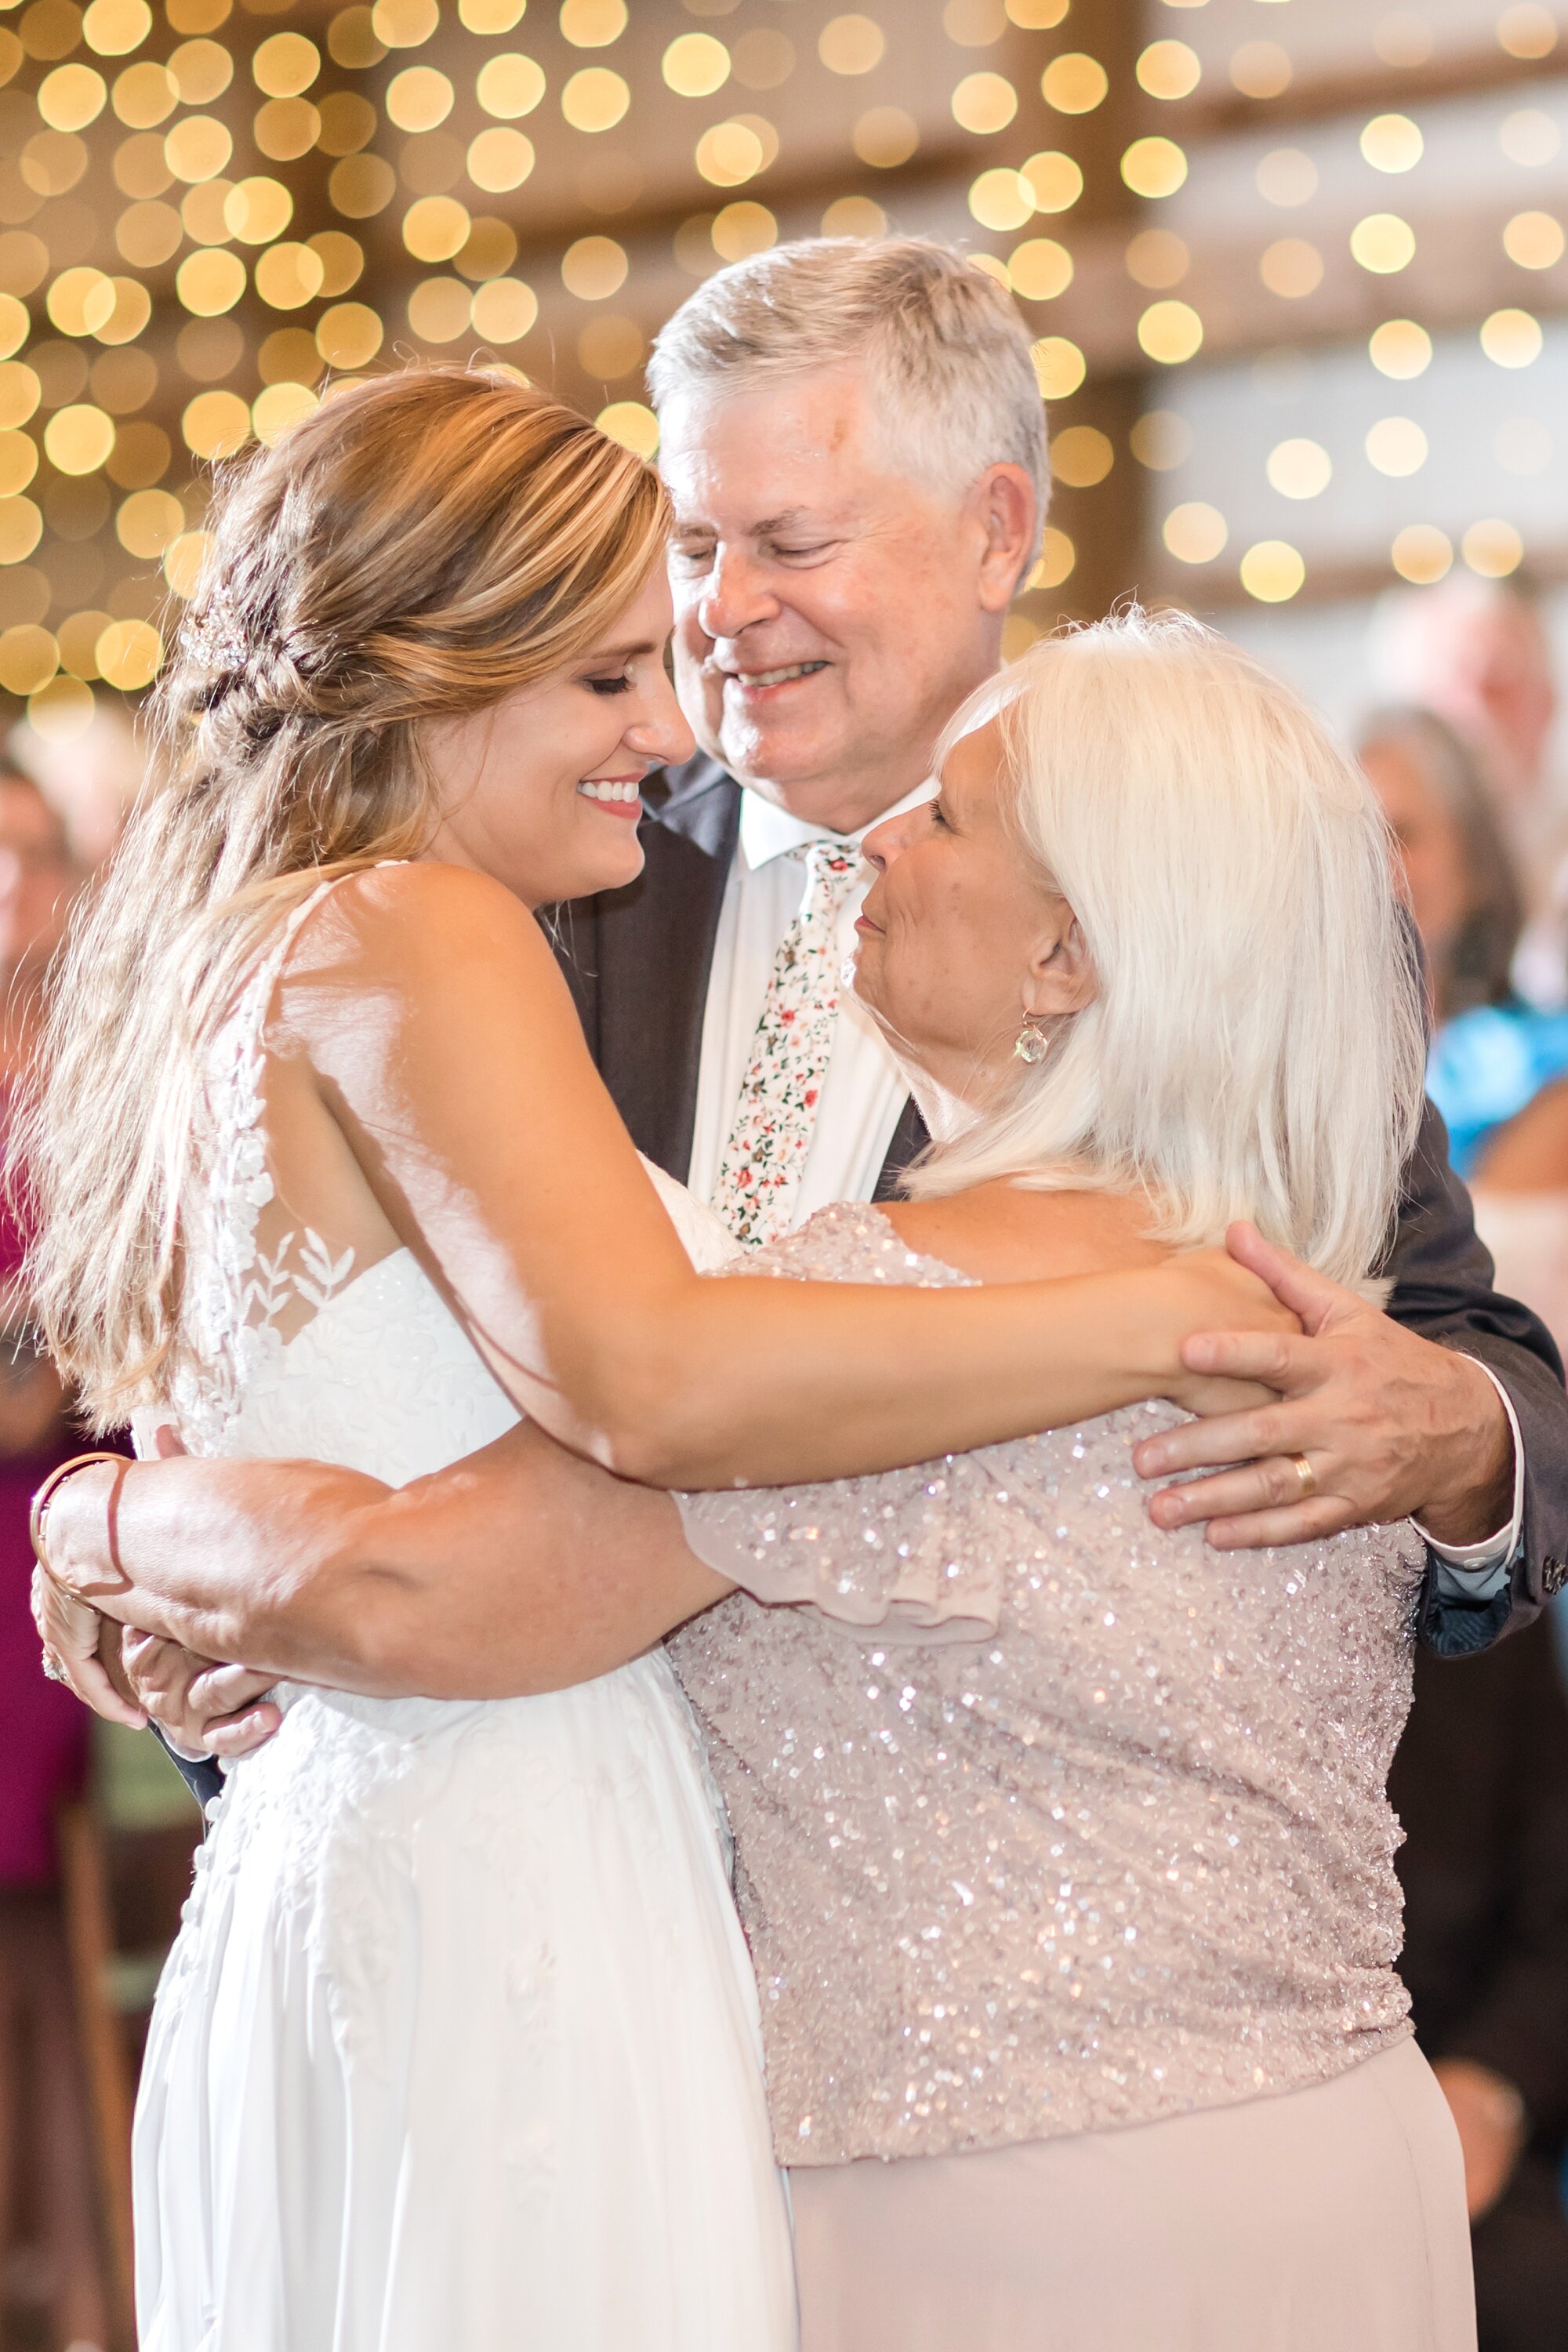  Sara and her dad invited Mrs. Cummings to join the end of their dance together. So many happy tears! 